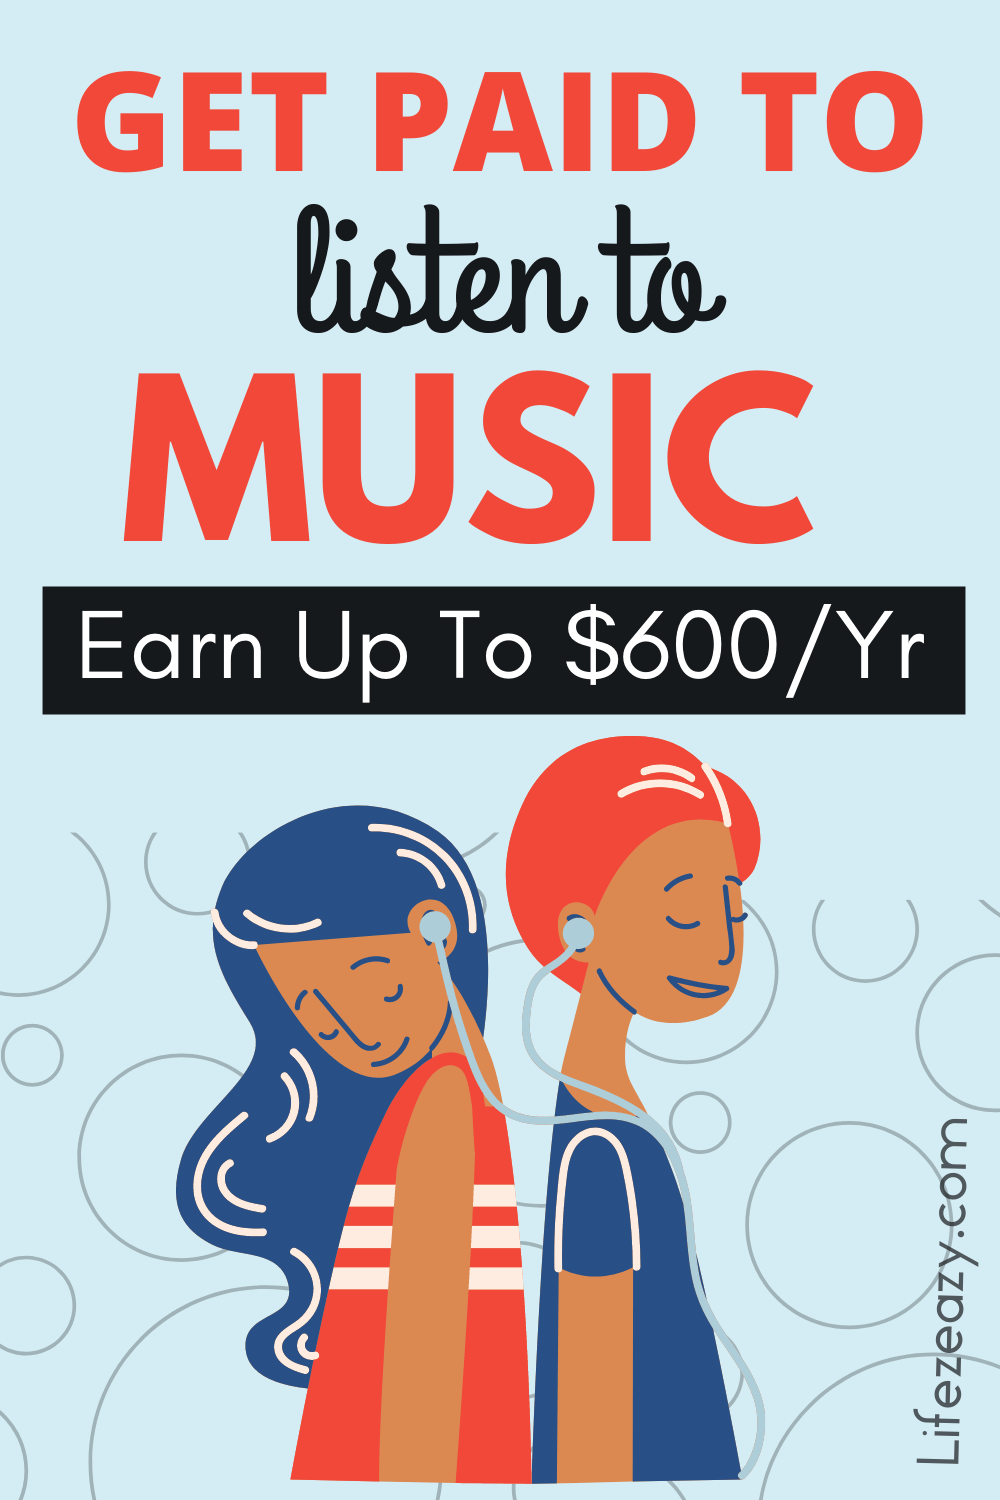 Get paid to listen to music